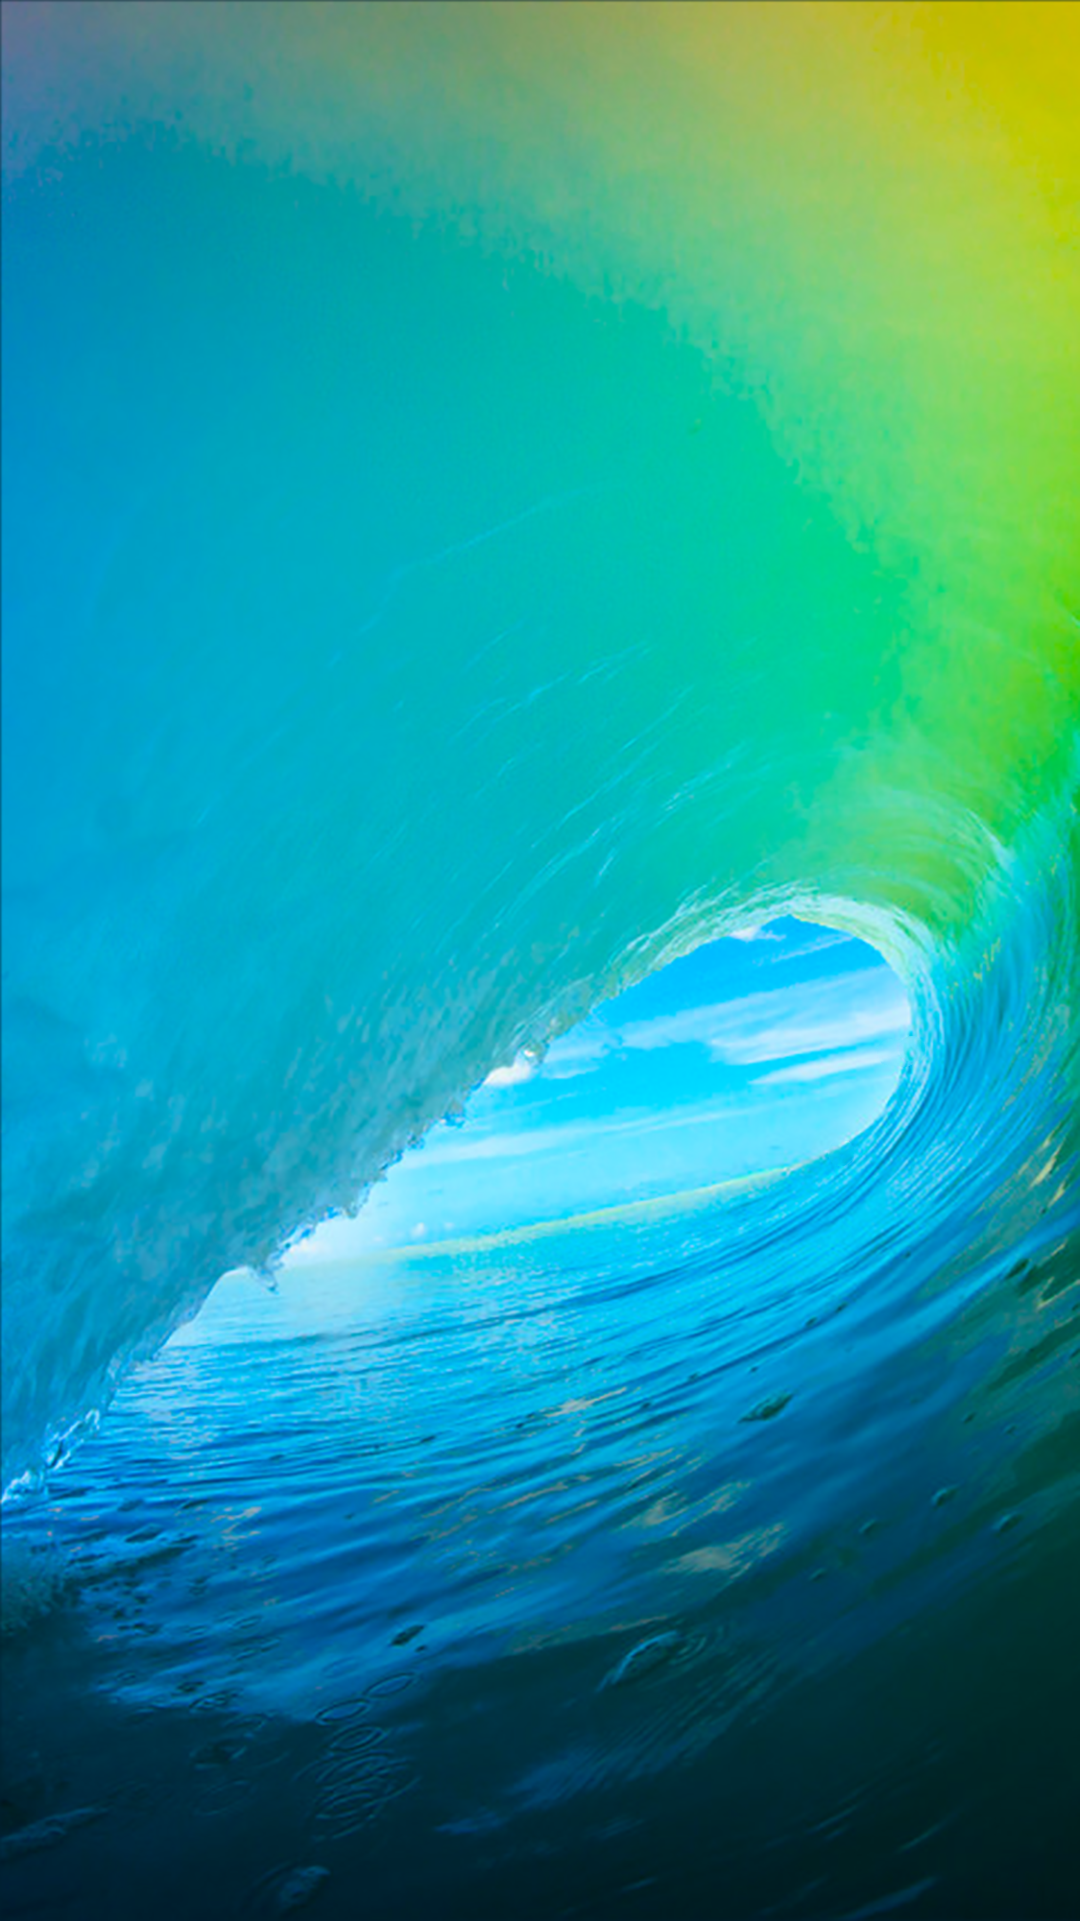 Here are all of iOS 9's colorful new wallpapers for your iPhone ...